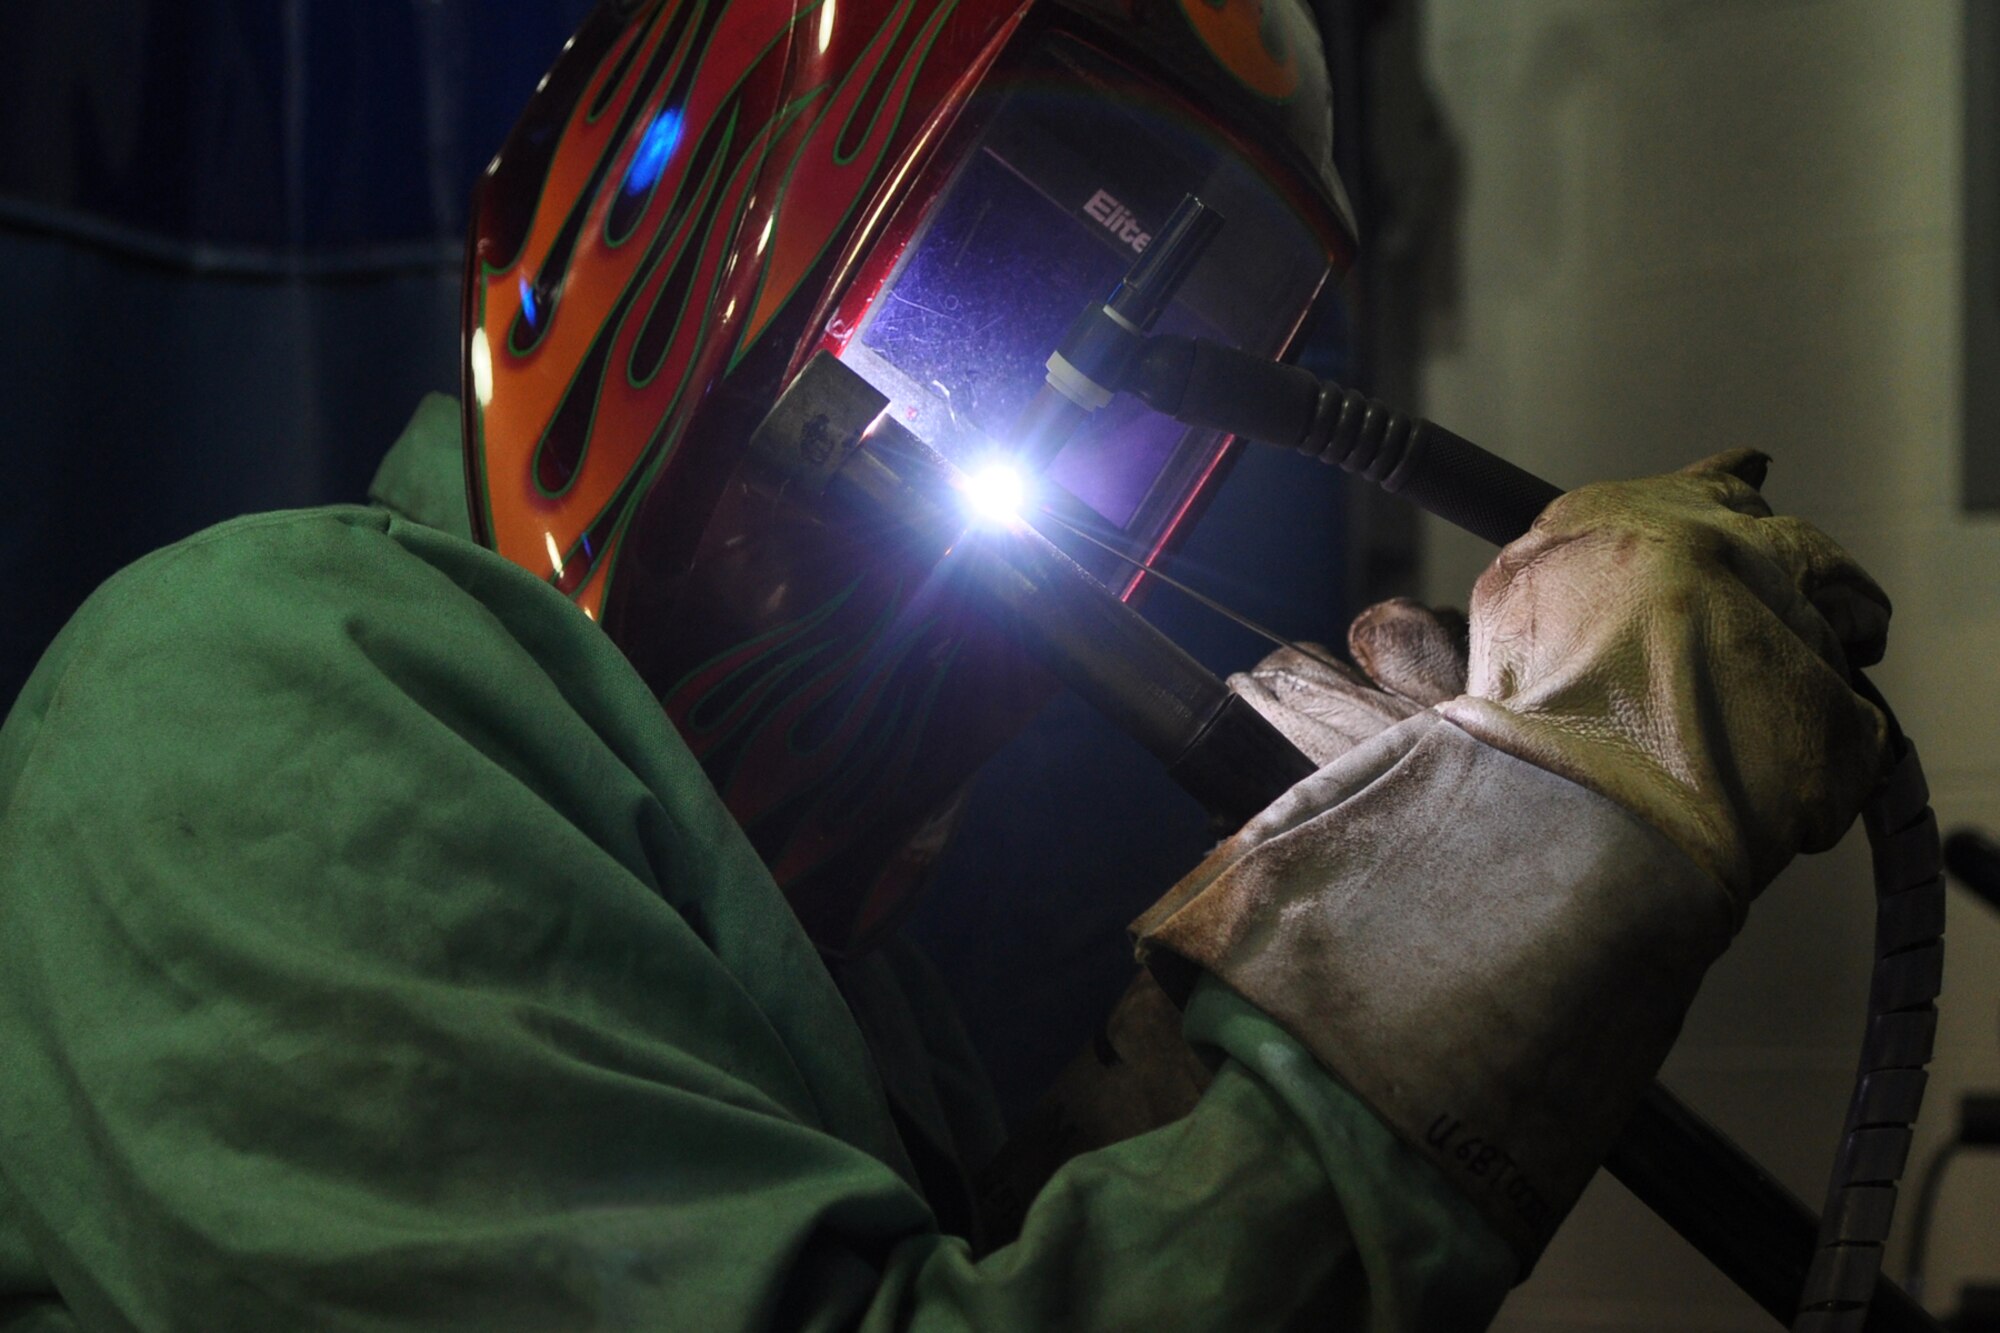 Senior Airman Travis Reuther, who is a metals technologist assigned to the 307th Maintenance Squadron, welds a titanium tube as part of his training progress at Barksdale Air Force Base, La., Nov. 4, 2012. (U.S. Air Force photo by Master Sgt. Jeff Walston/ Released)   